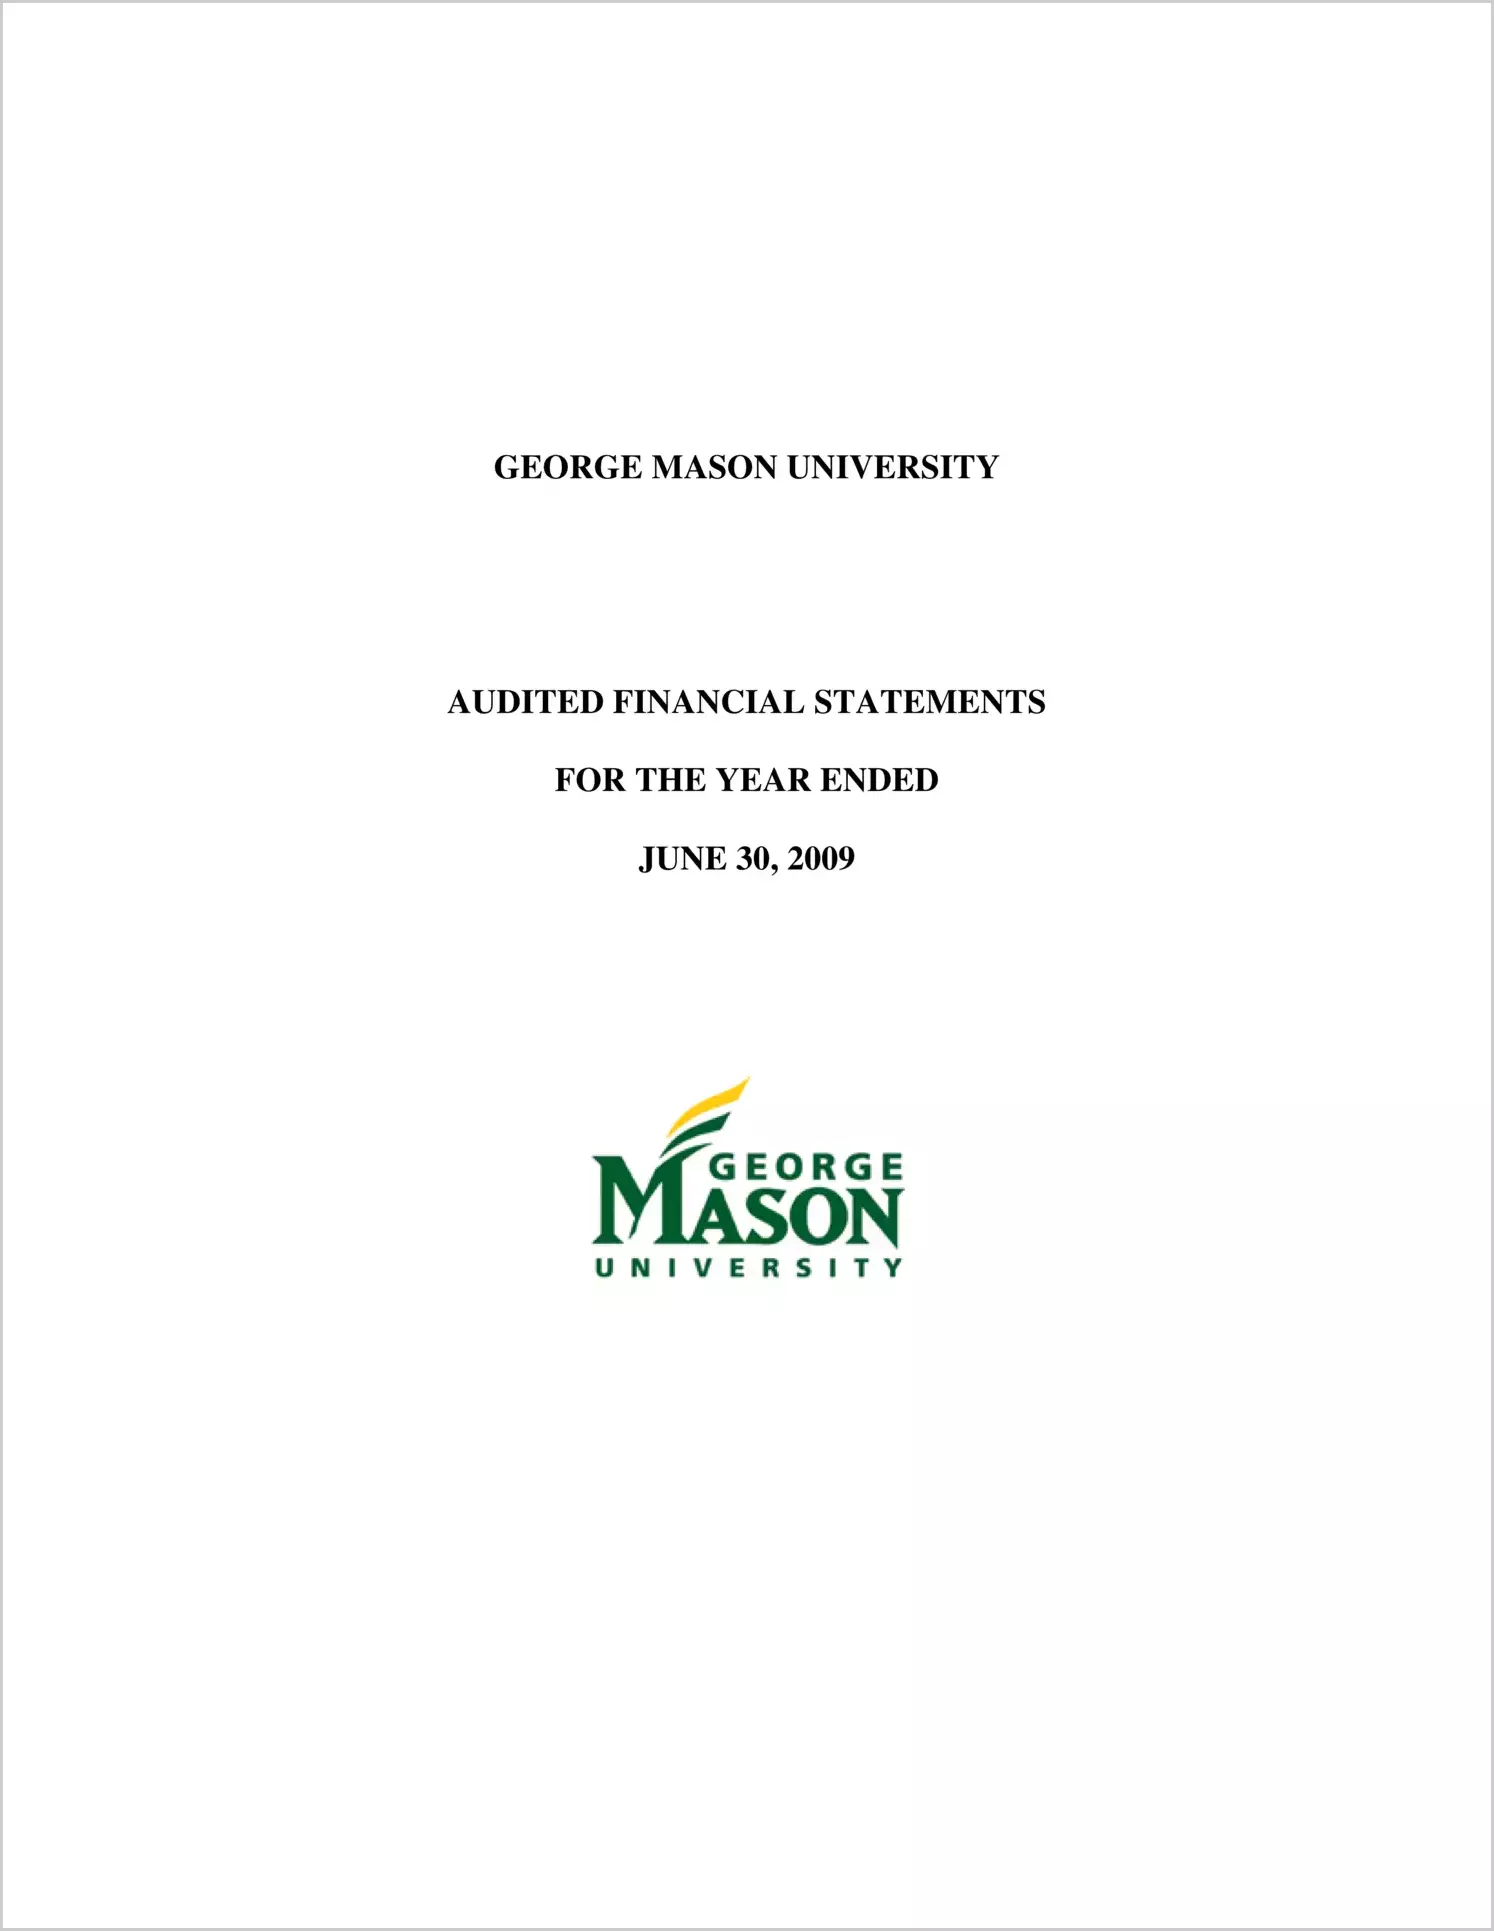 Financial Statements for George Mason University year ended June 30, 2009